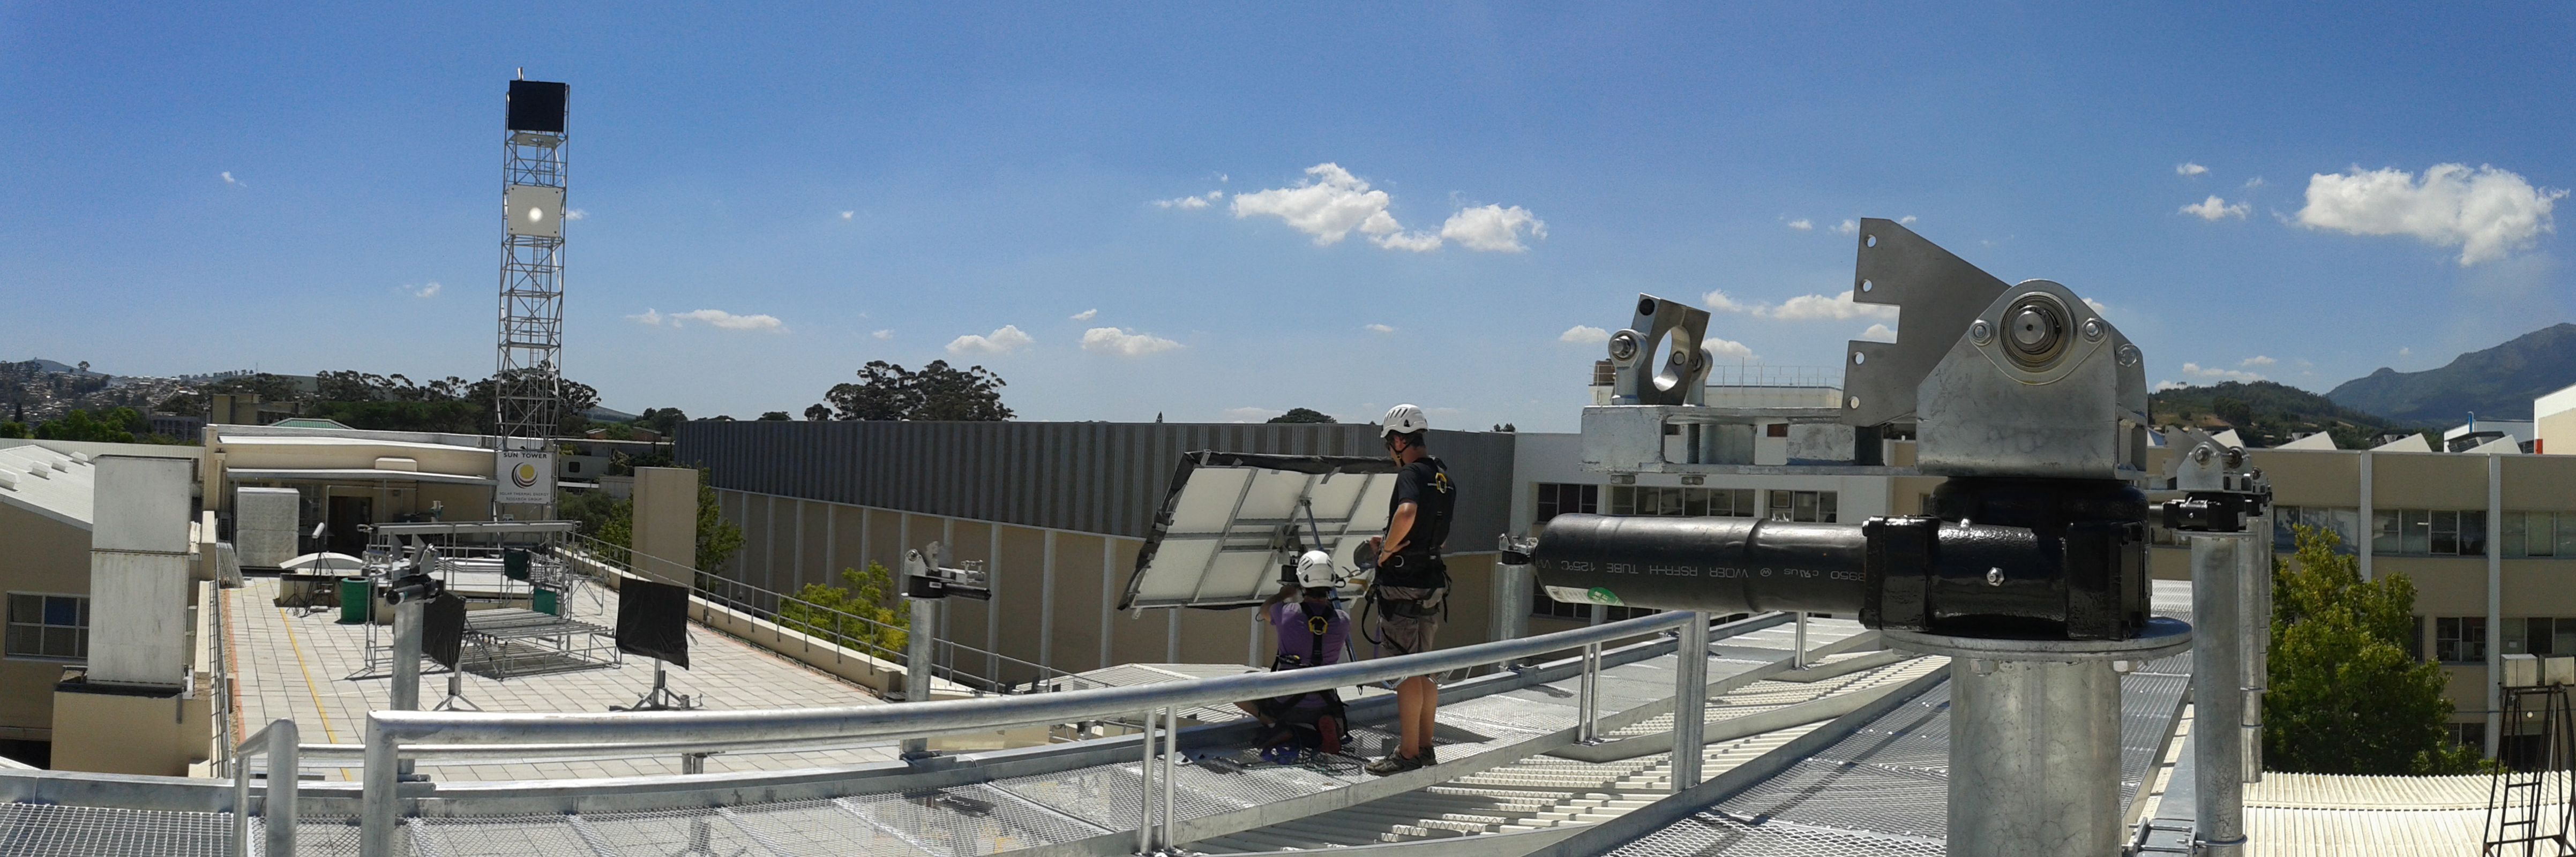 Erection of the SASOL Helio40 heliostats at the STERG facilities